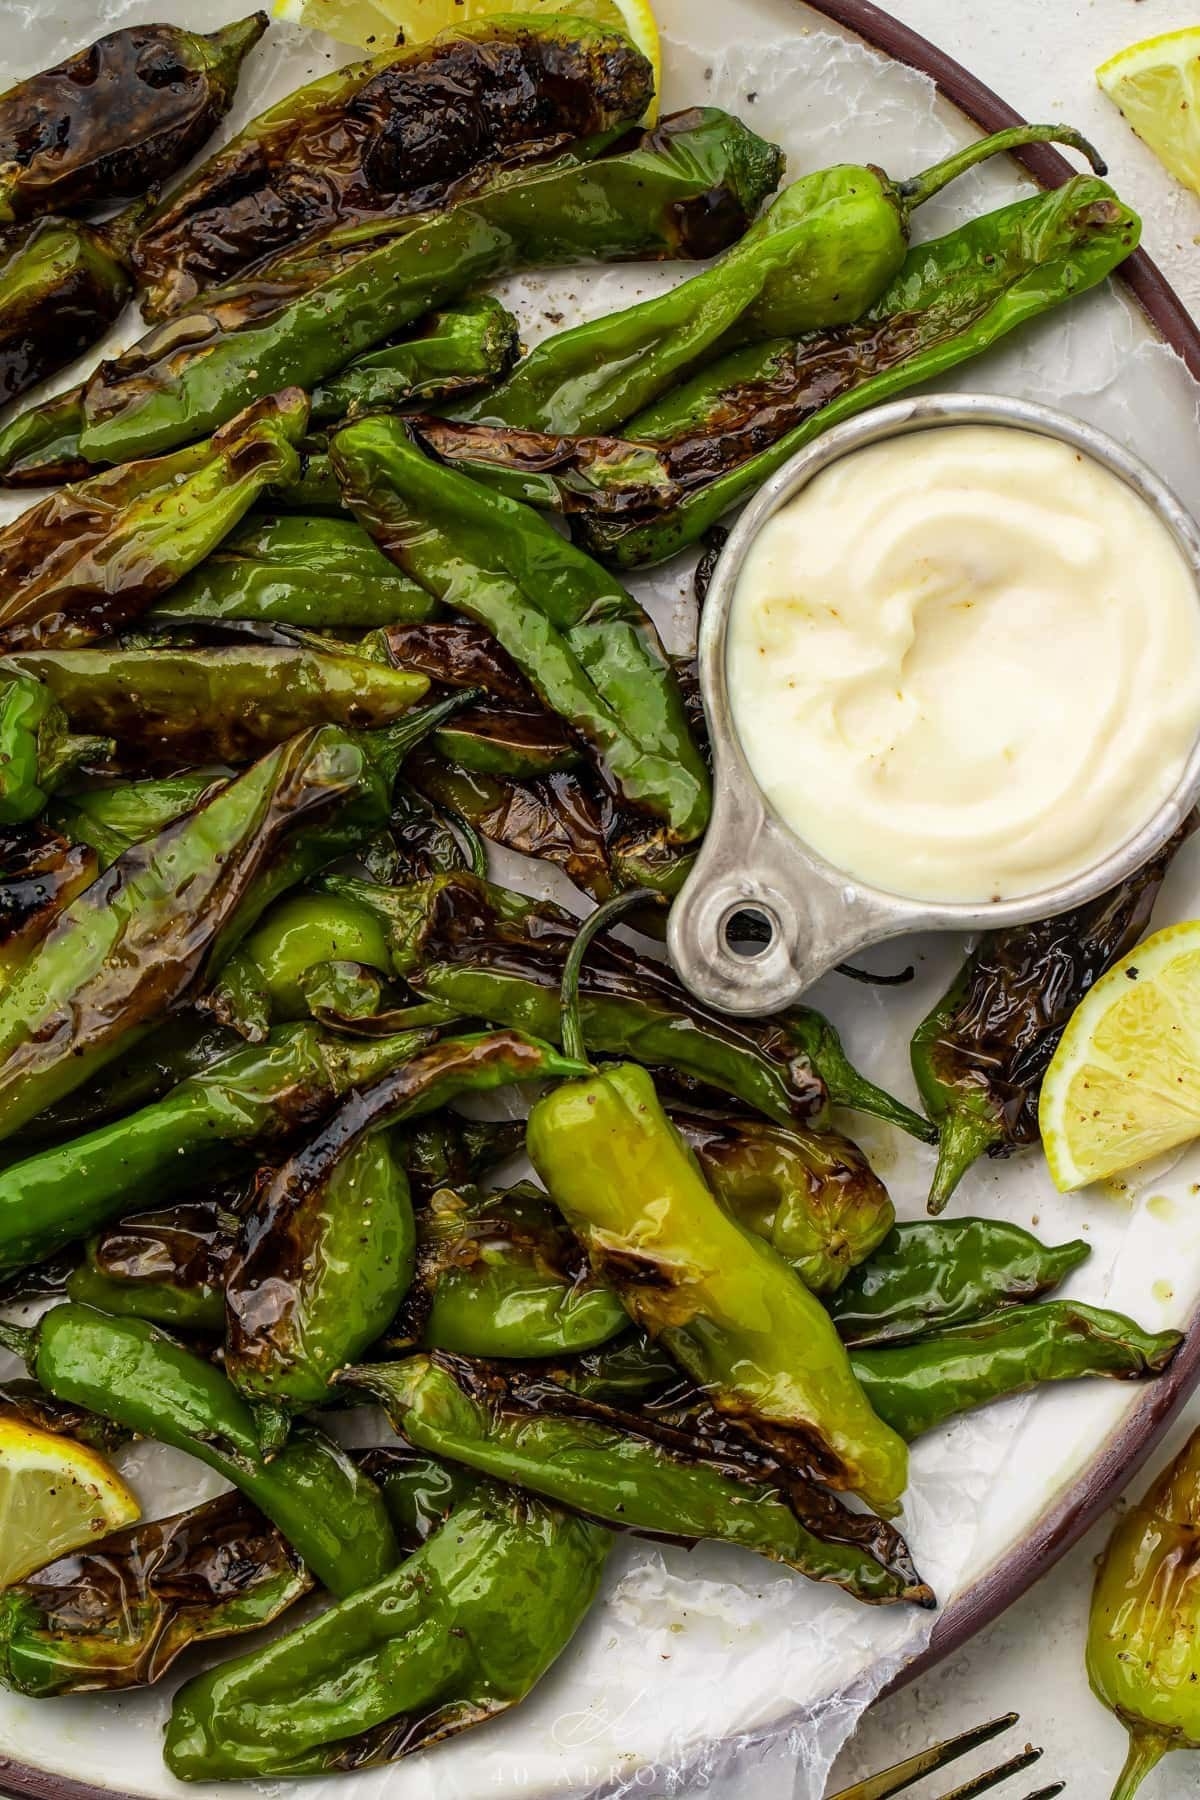 Blistered shishito peppers with aioli dipping sauce.